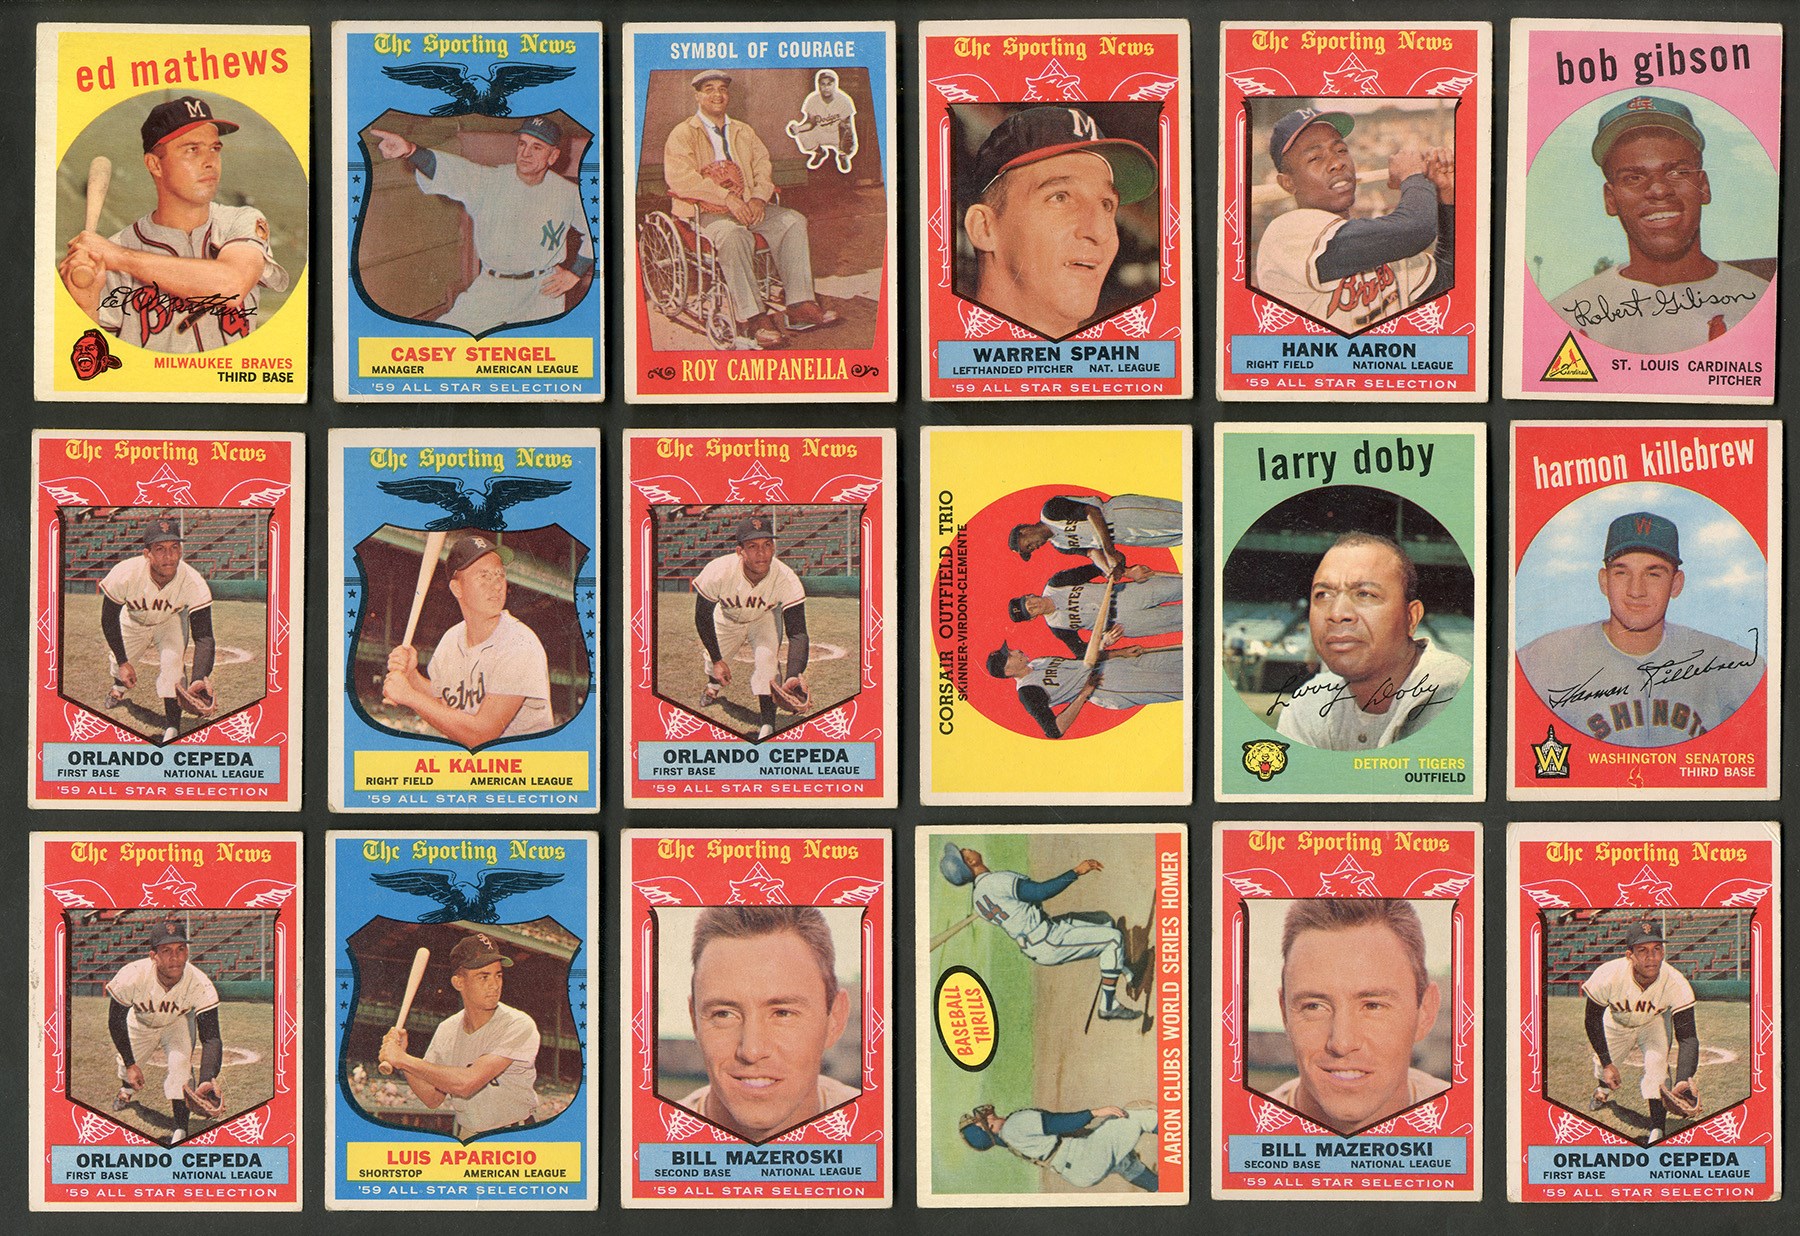 Baseball and Trading Cards - 1959 Topps Baseball Partial Set with Gibson Rookie (350+ Cards)